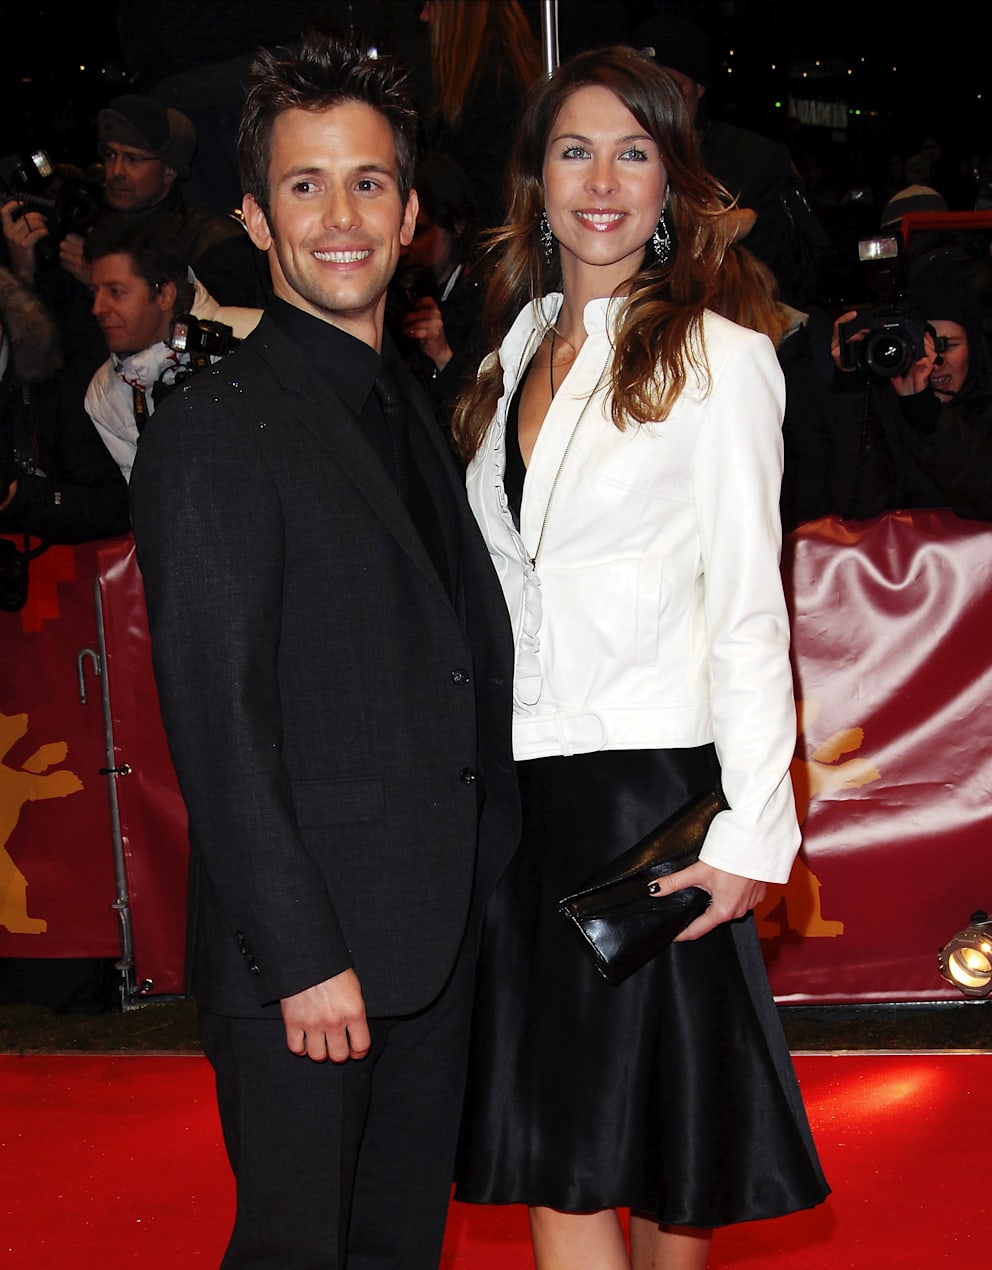 Christian Oliver with ex-wife Jessica Mazur.  She works as a showbiz reporter in Los Angeles